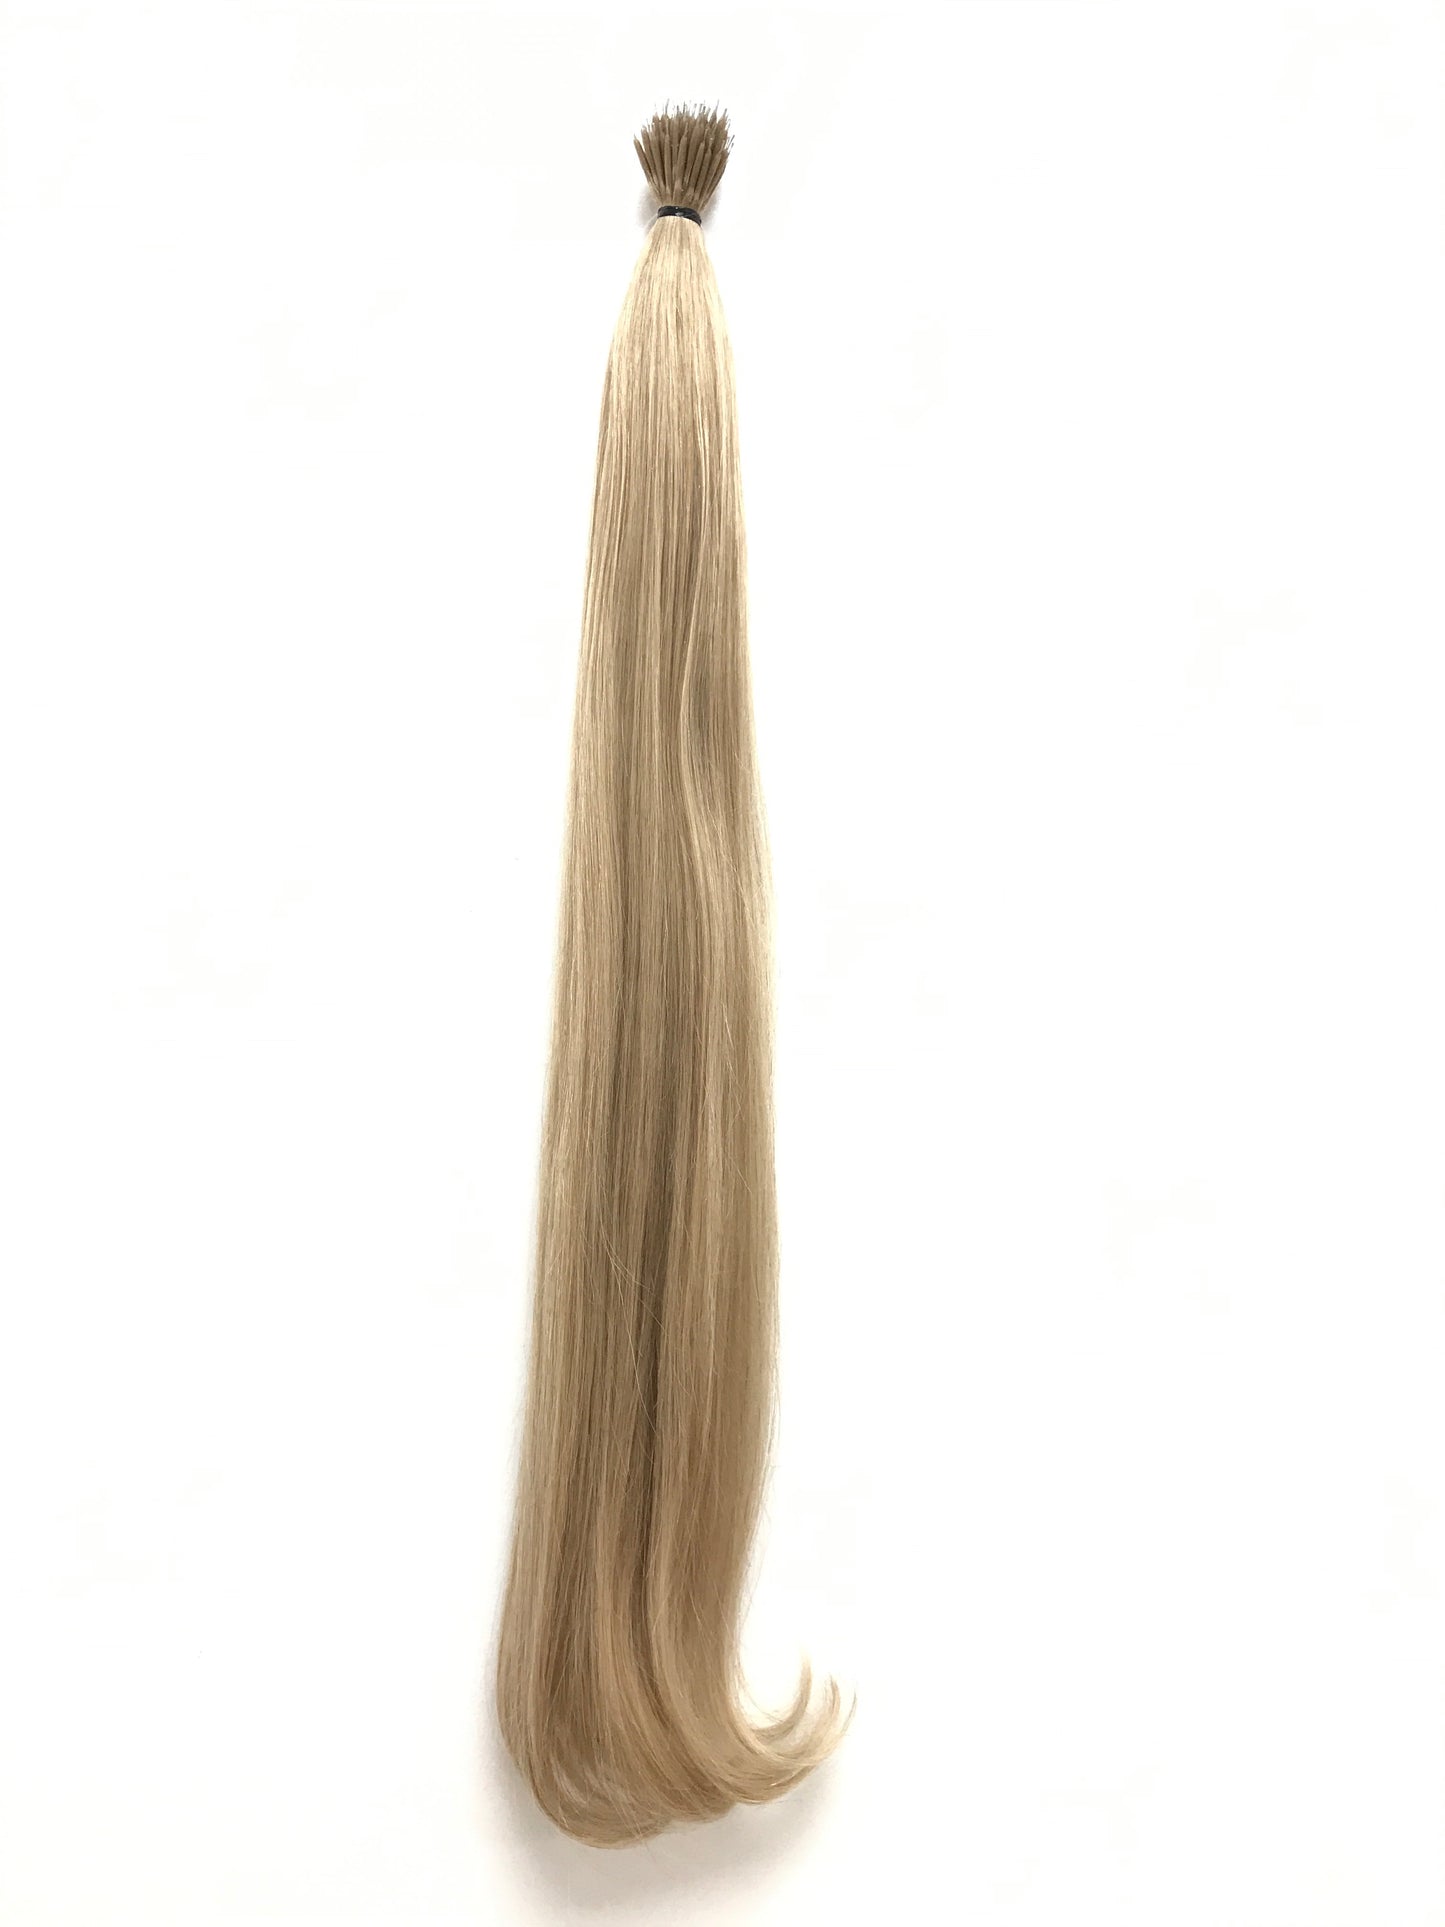 Russian Virgin Remy Human Hair,Nano Tip Hair Extentions , Straight, 24'',Quick Shipping!